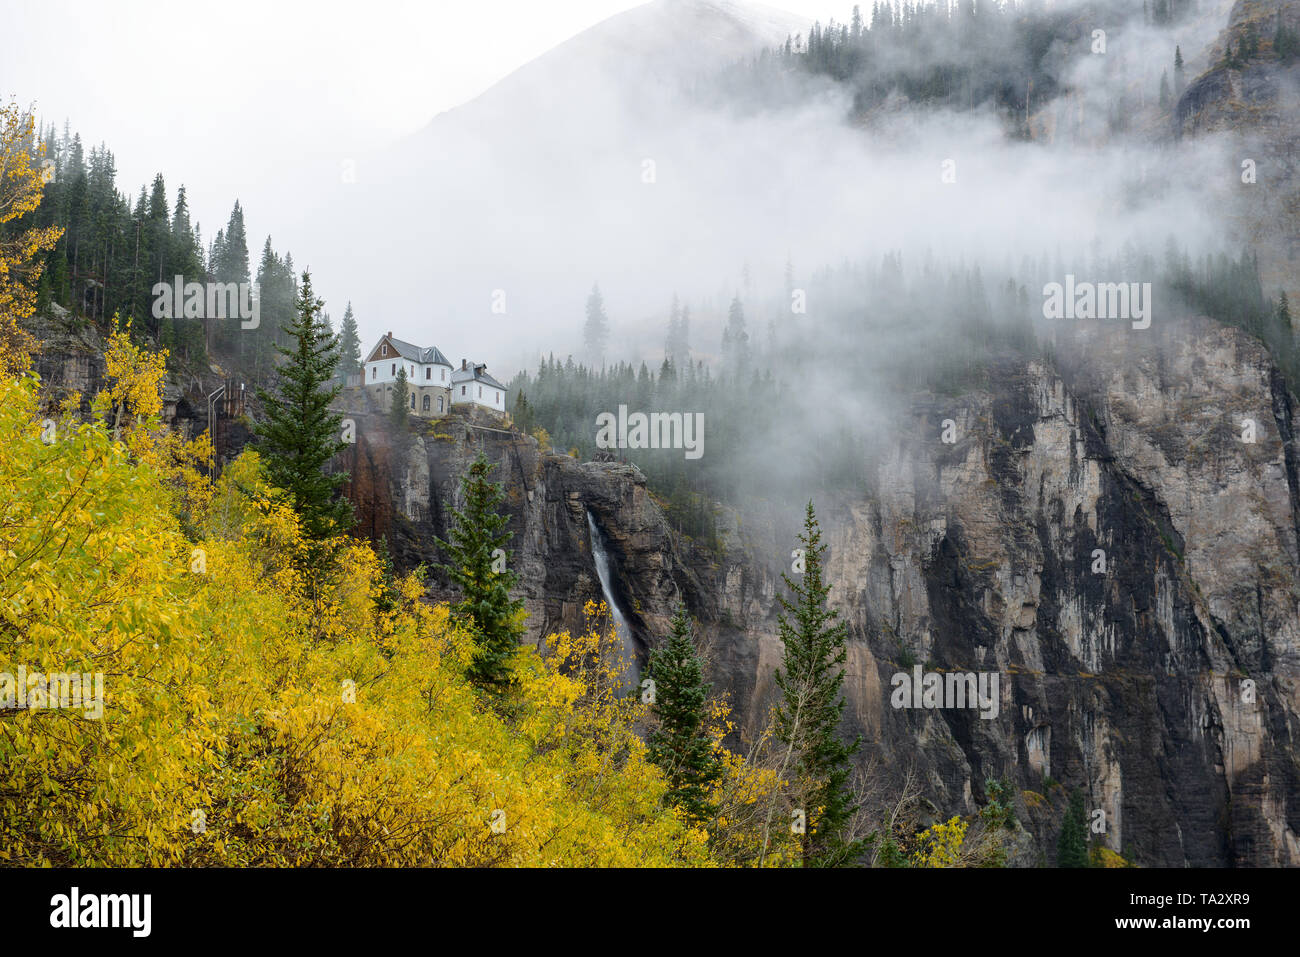 Autumn at Bridal Veil Falls - A close-up view of Bridal Veil Falls, the highest free falling waterfall in Colorado, on a rainy autumn day. Telluride. Stock Photo